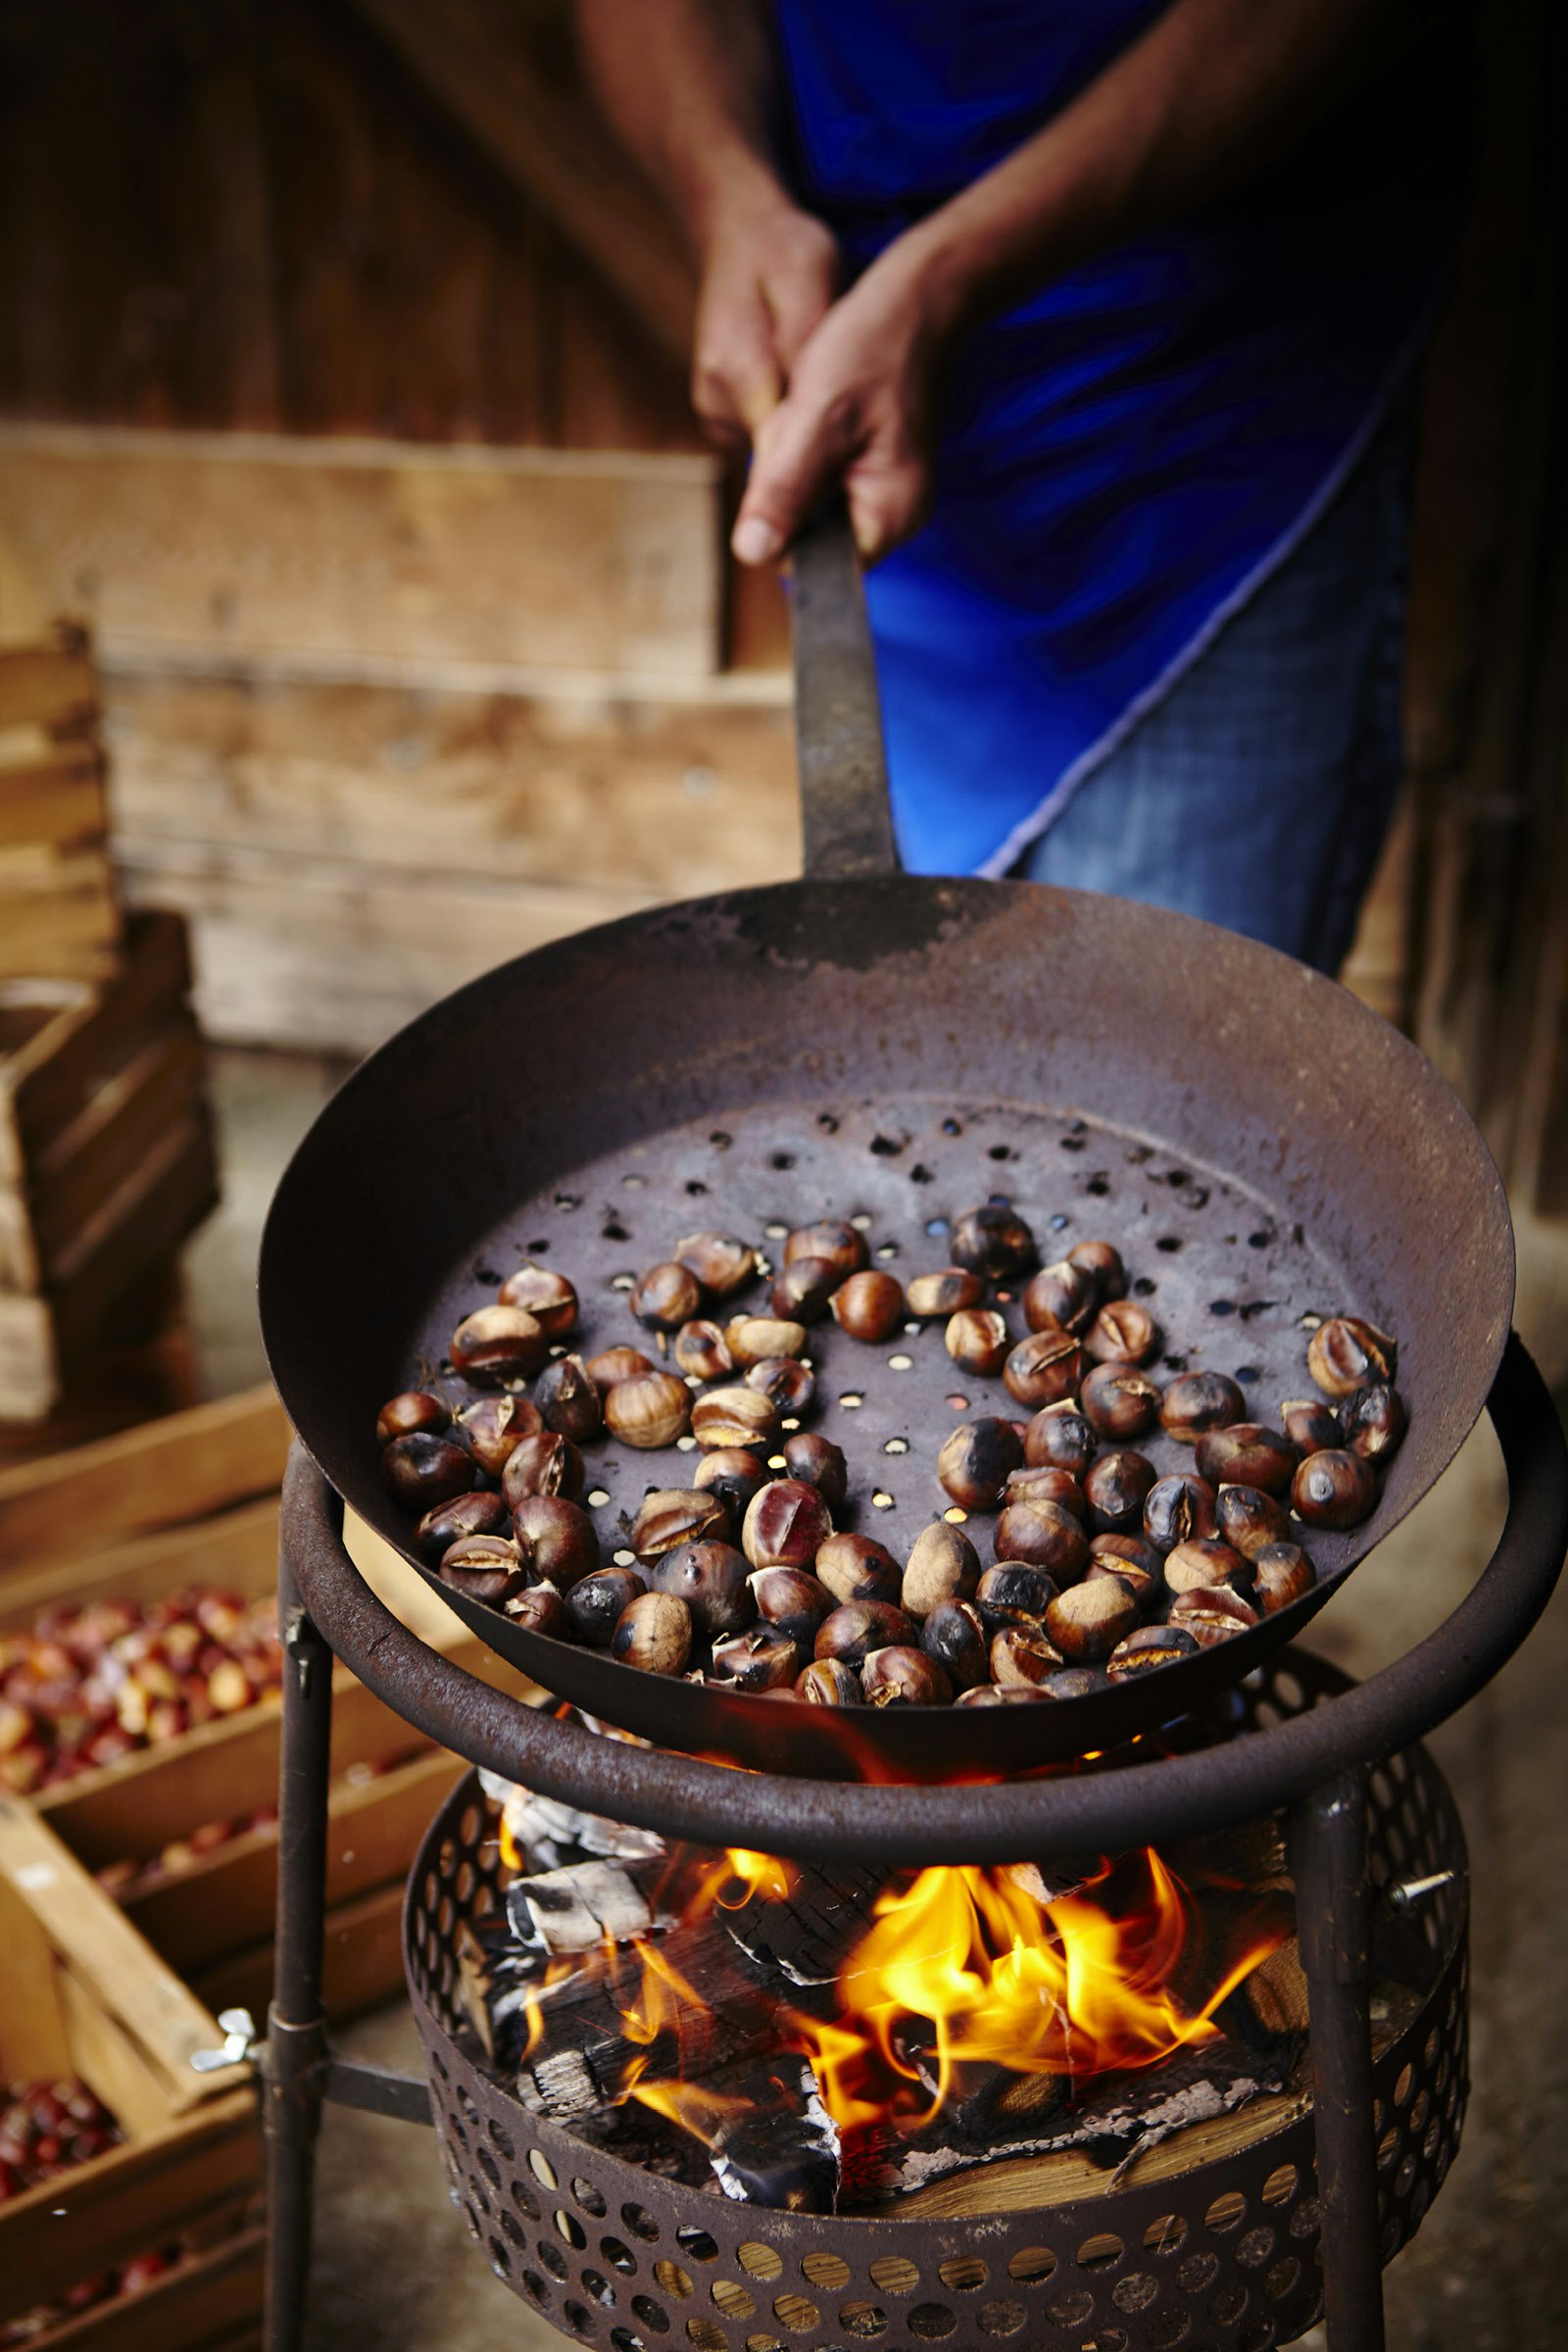 Chestnuts begin to blacken in a heavy pan over a brazier